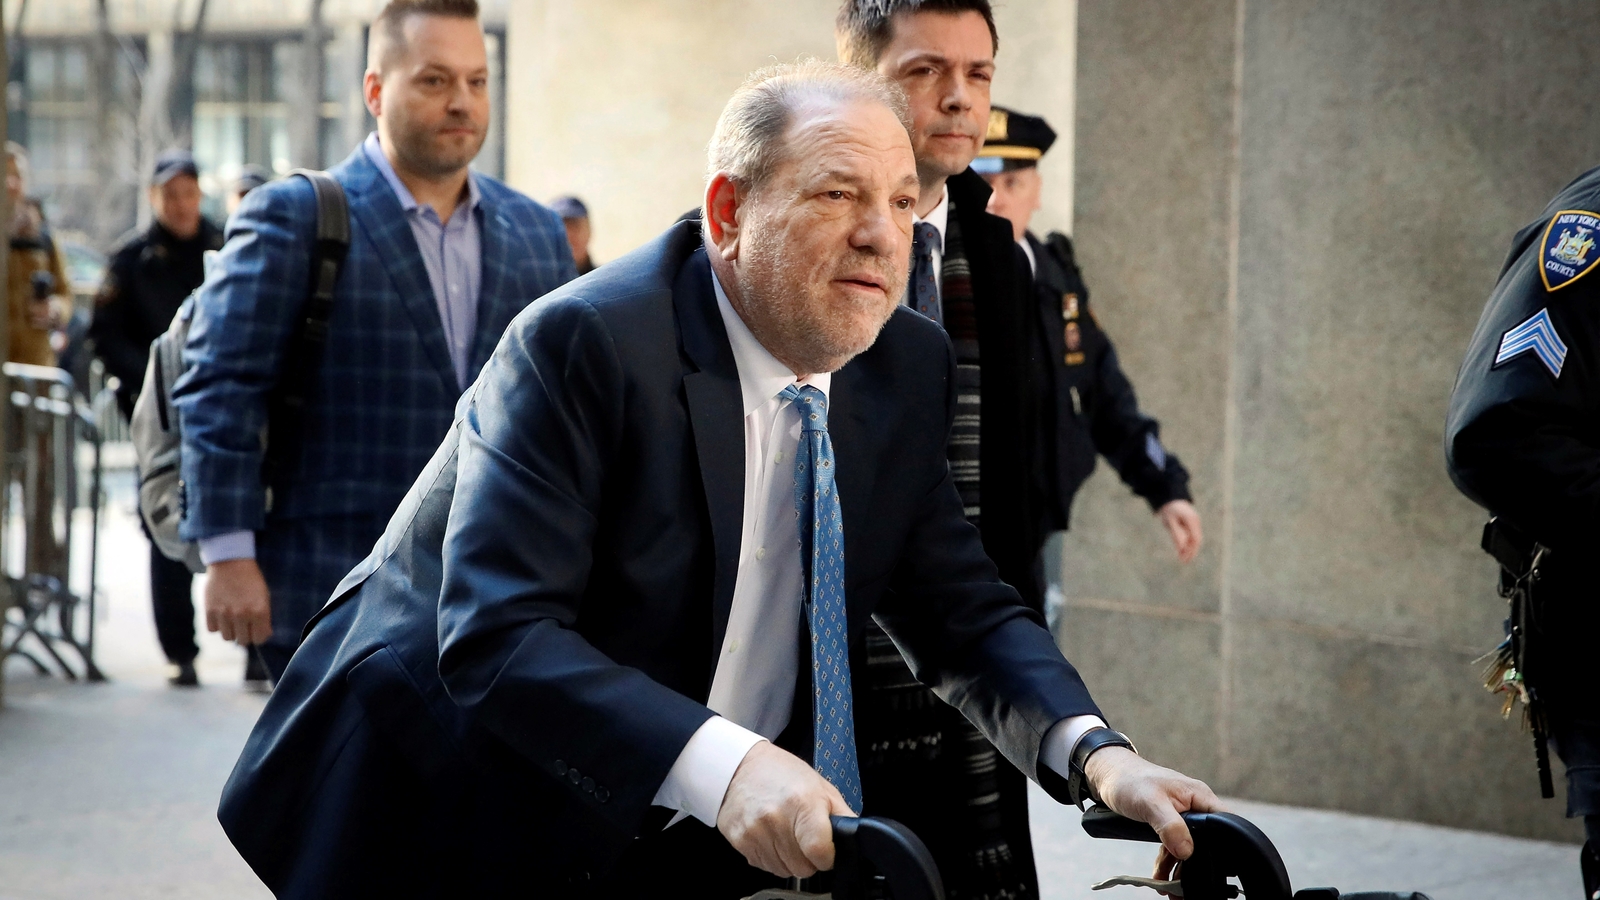 Harvey Weinstein hospitalized after his return to New York from upstate jail, lawyer says [Video]